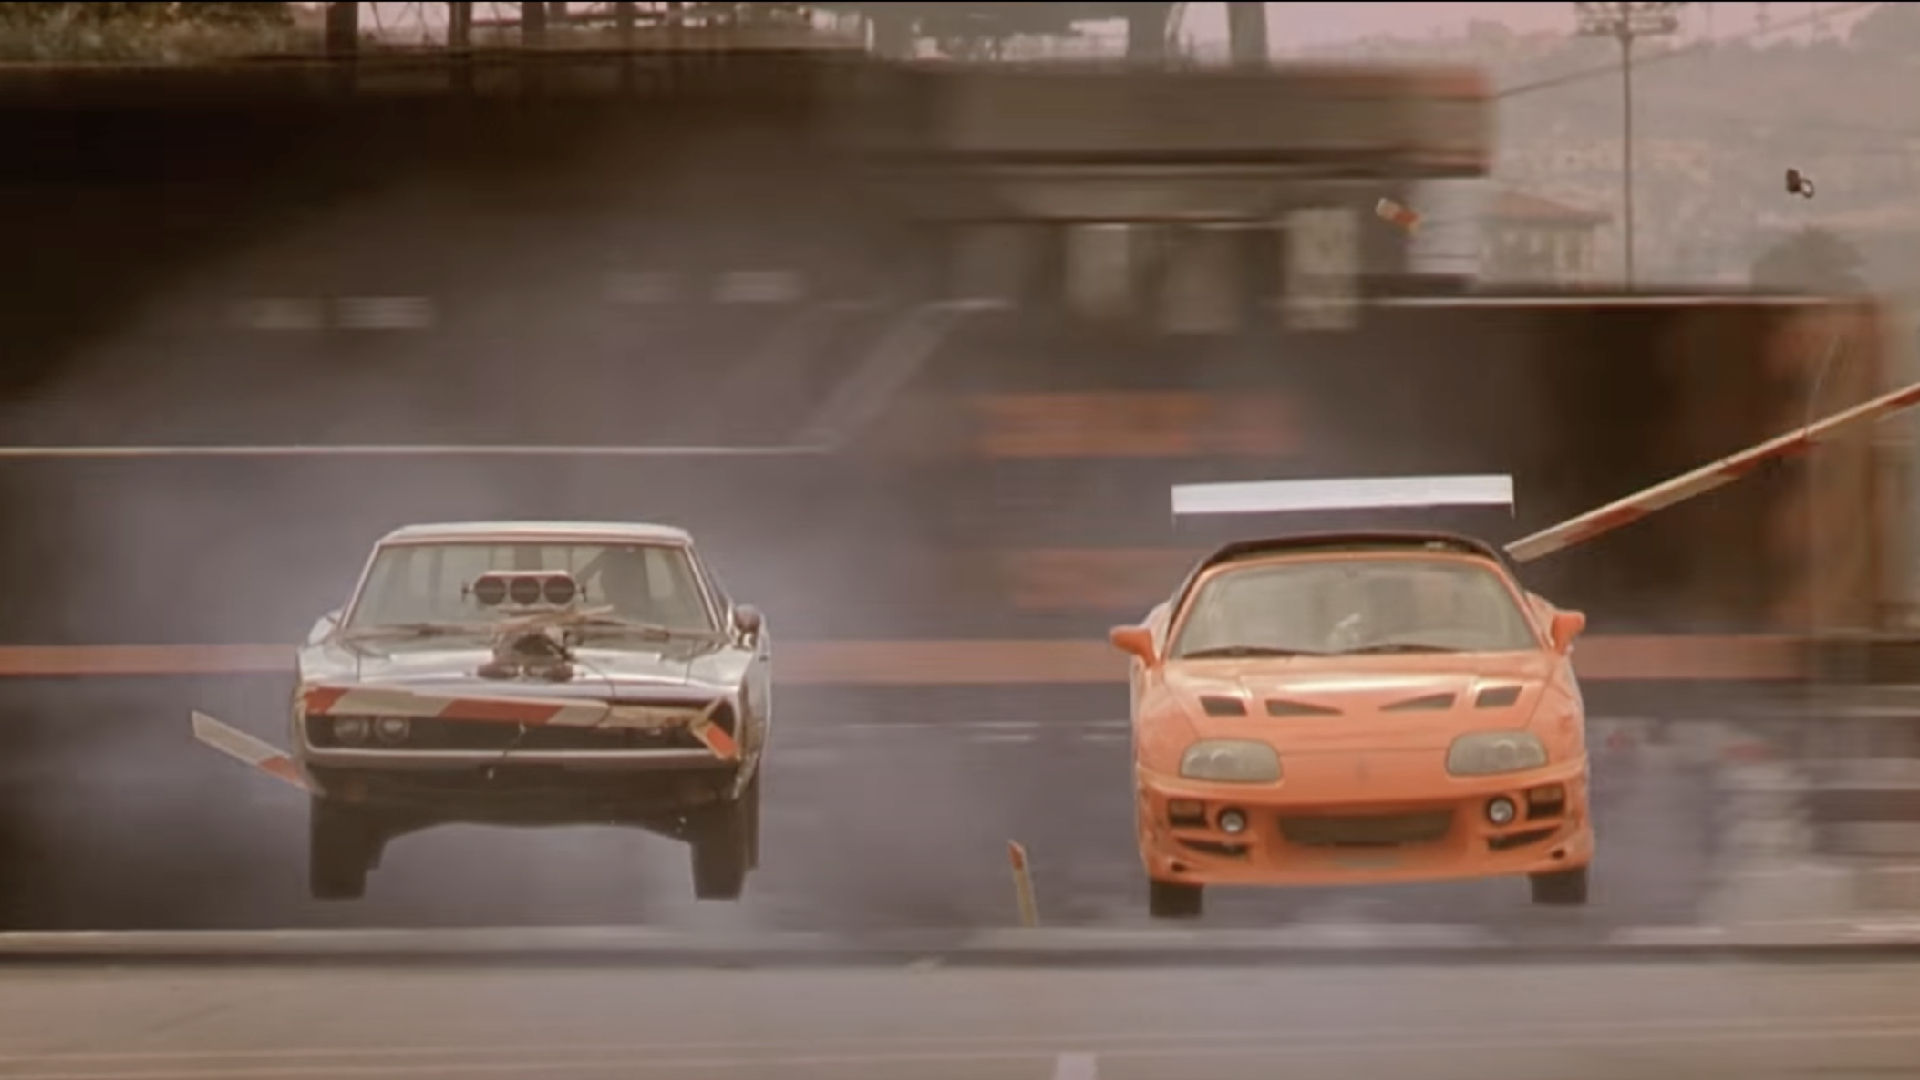 The Fast and the Furious: Tokyo Drift (2006) - IMDb